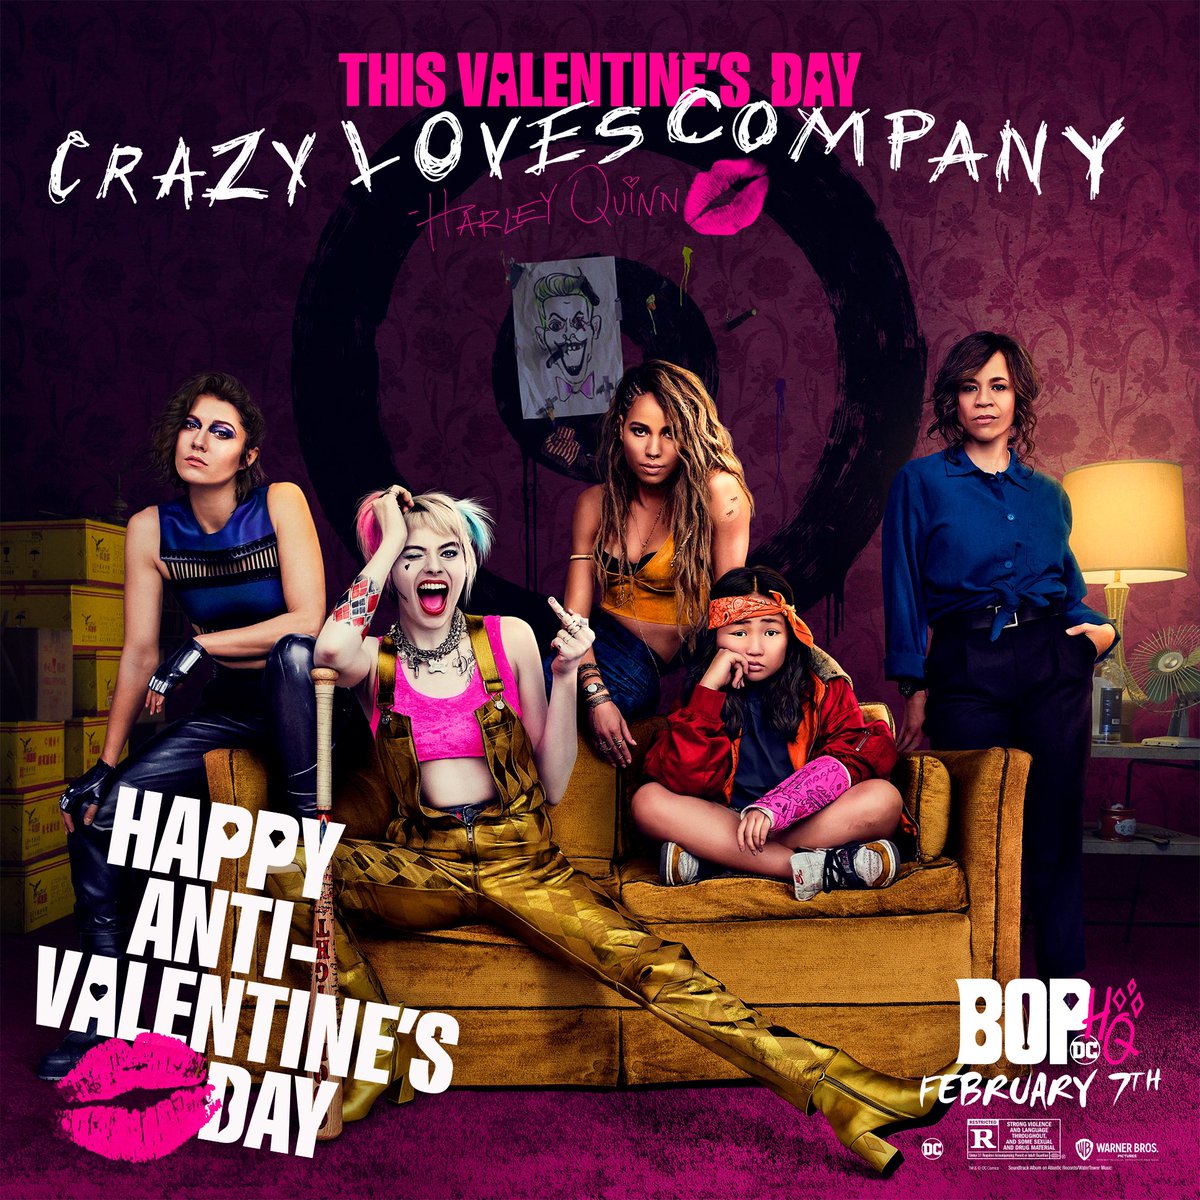 Birds of Prey (And the Fantabulous Emancipation of One Harley Quinn) (2020) Anti-Valentine's Poster